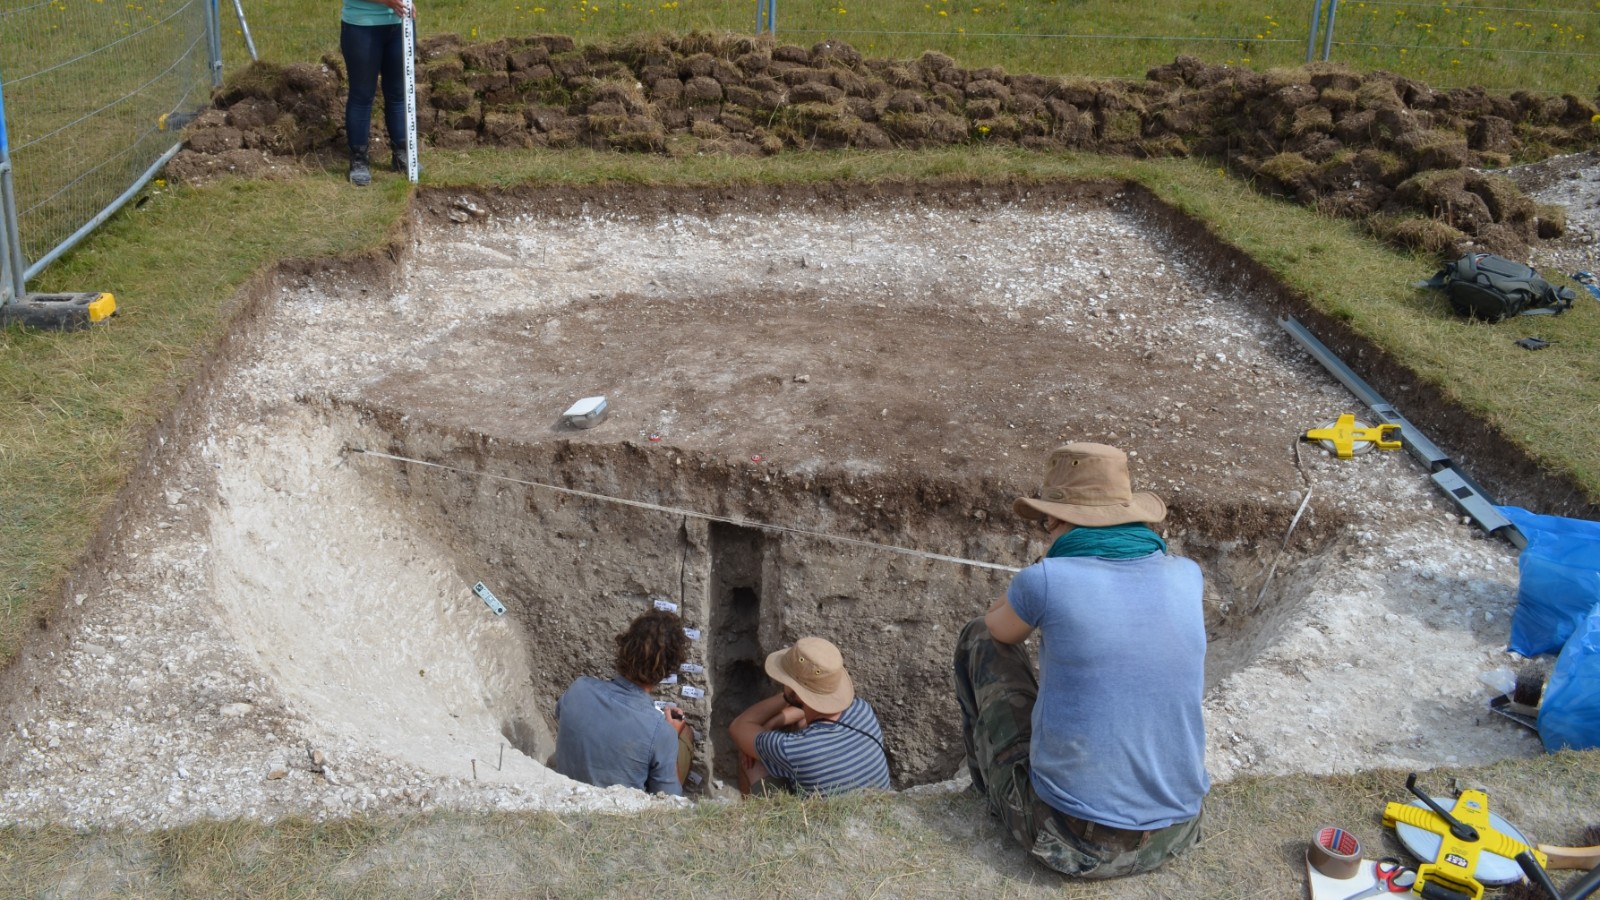 In this photo we see a large square piece of grass that has been dug up to reveal a 10,000 year old pit.  Inside the pit are 2 archaeologists taking samples.  There are 2 more archaeologists outside the pit, on opposite sides, taking measurements.  Several tools are scattered around the site.